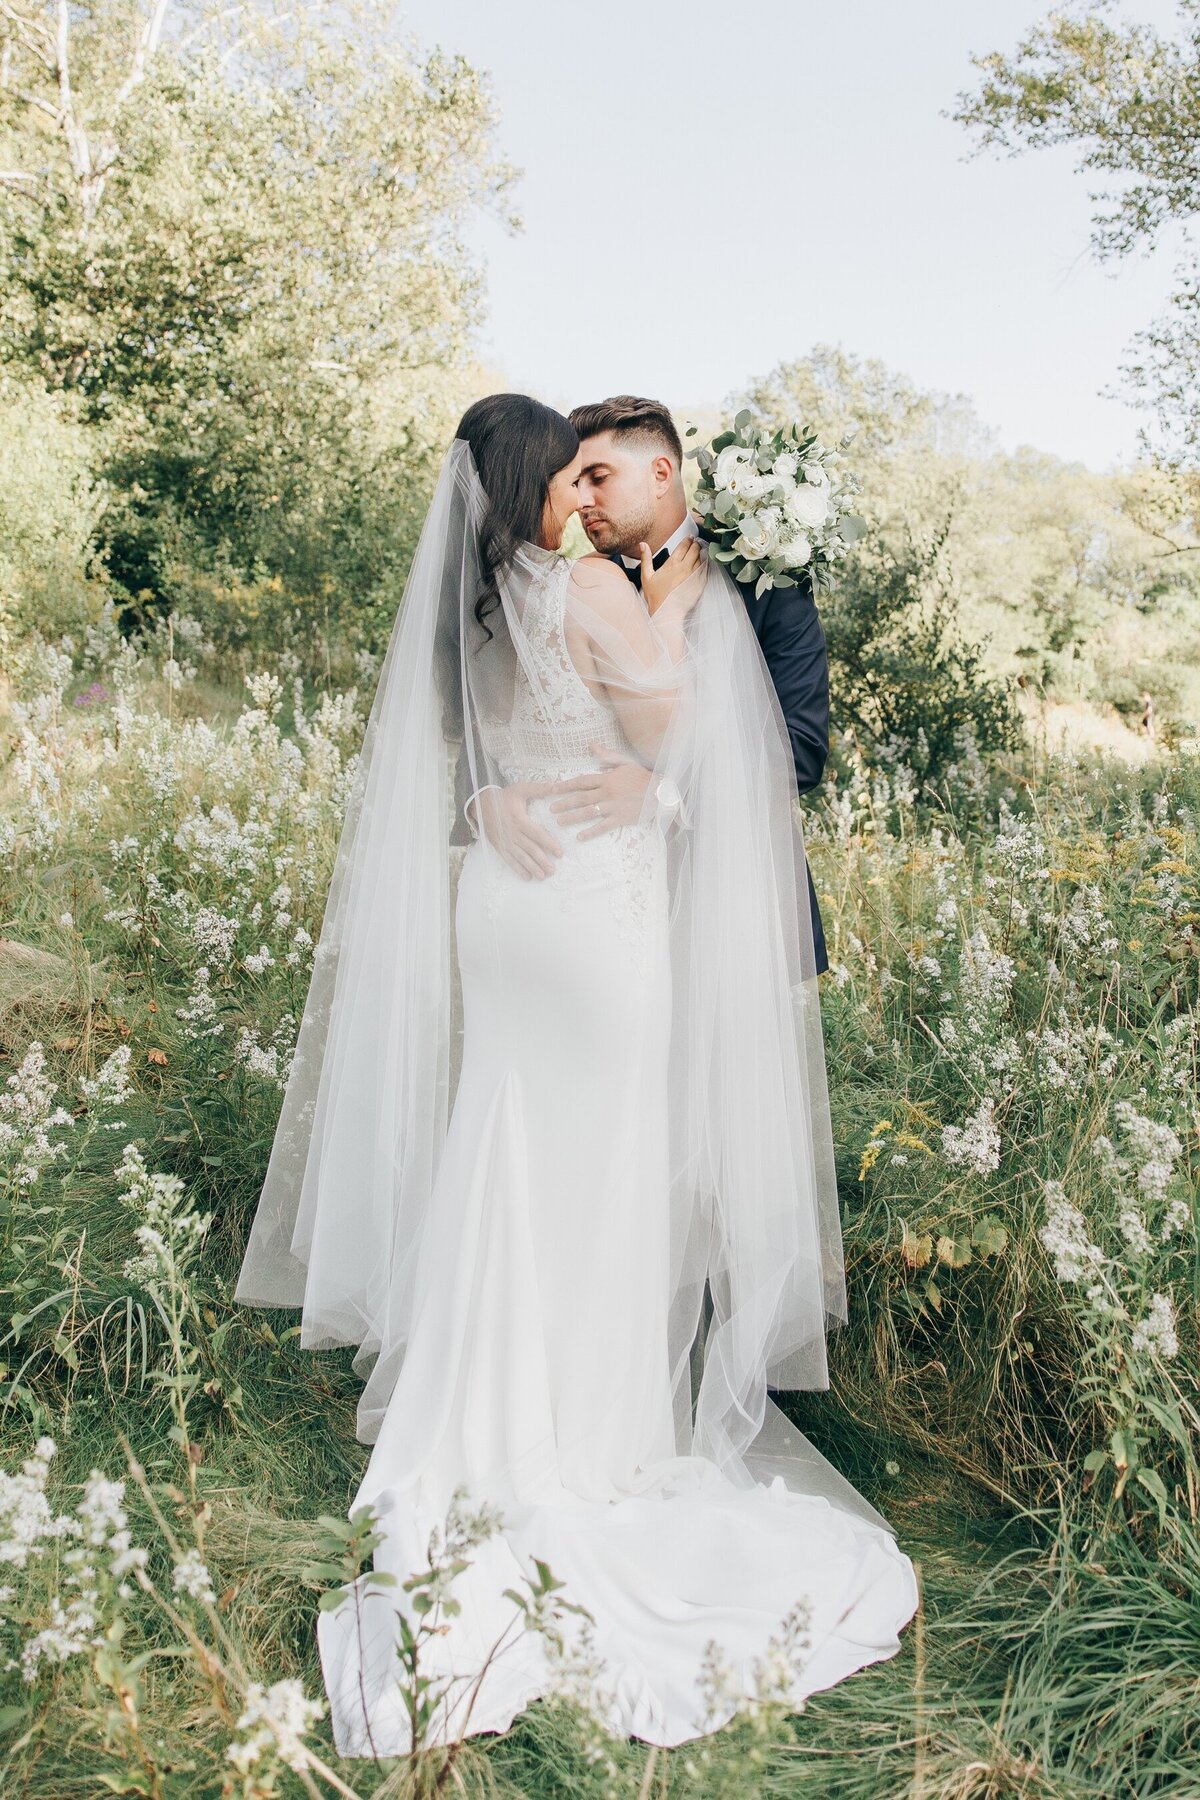 A bride and groom kissing in a field